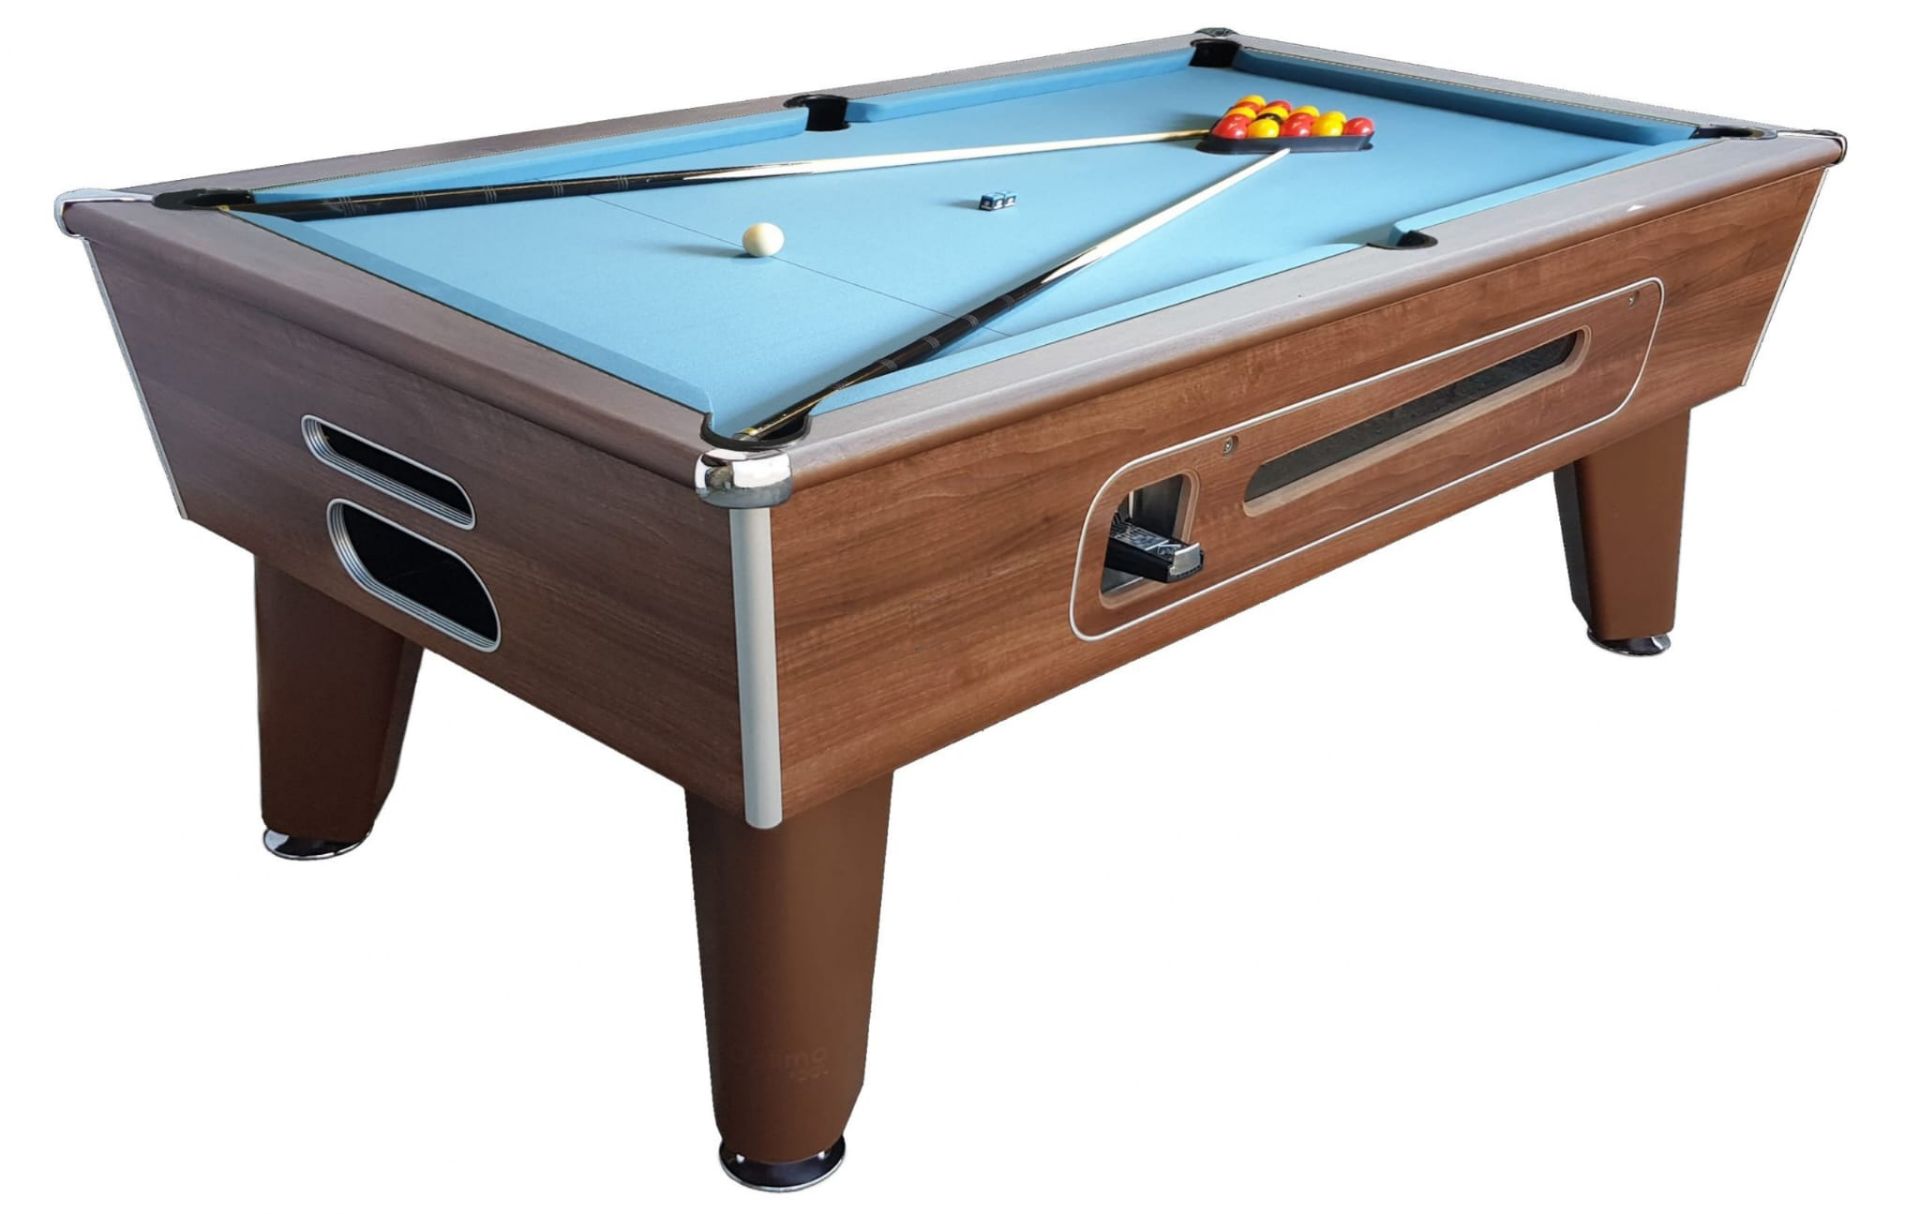 Barline pool table available in 6*3. Coin-operated and free play. Choice of cloth colors. - Image 3 of 3